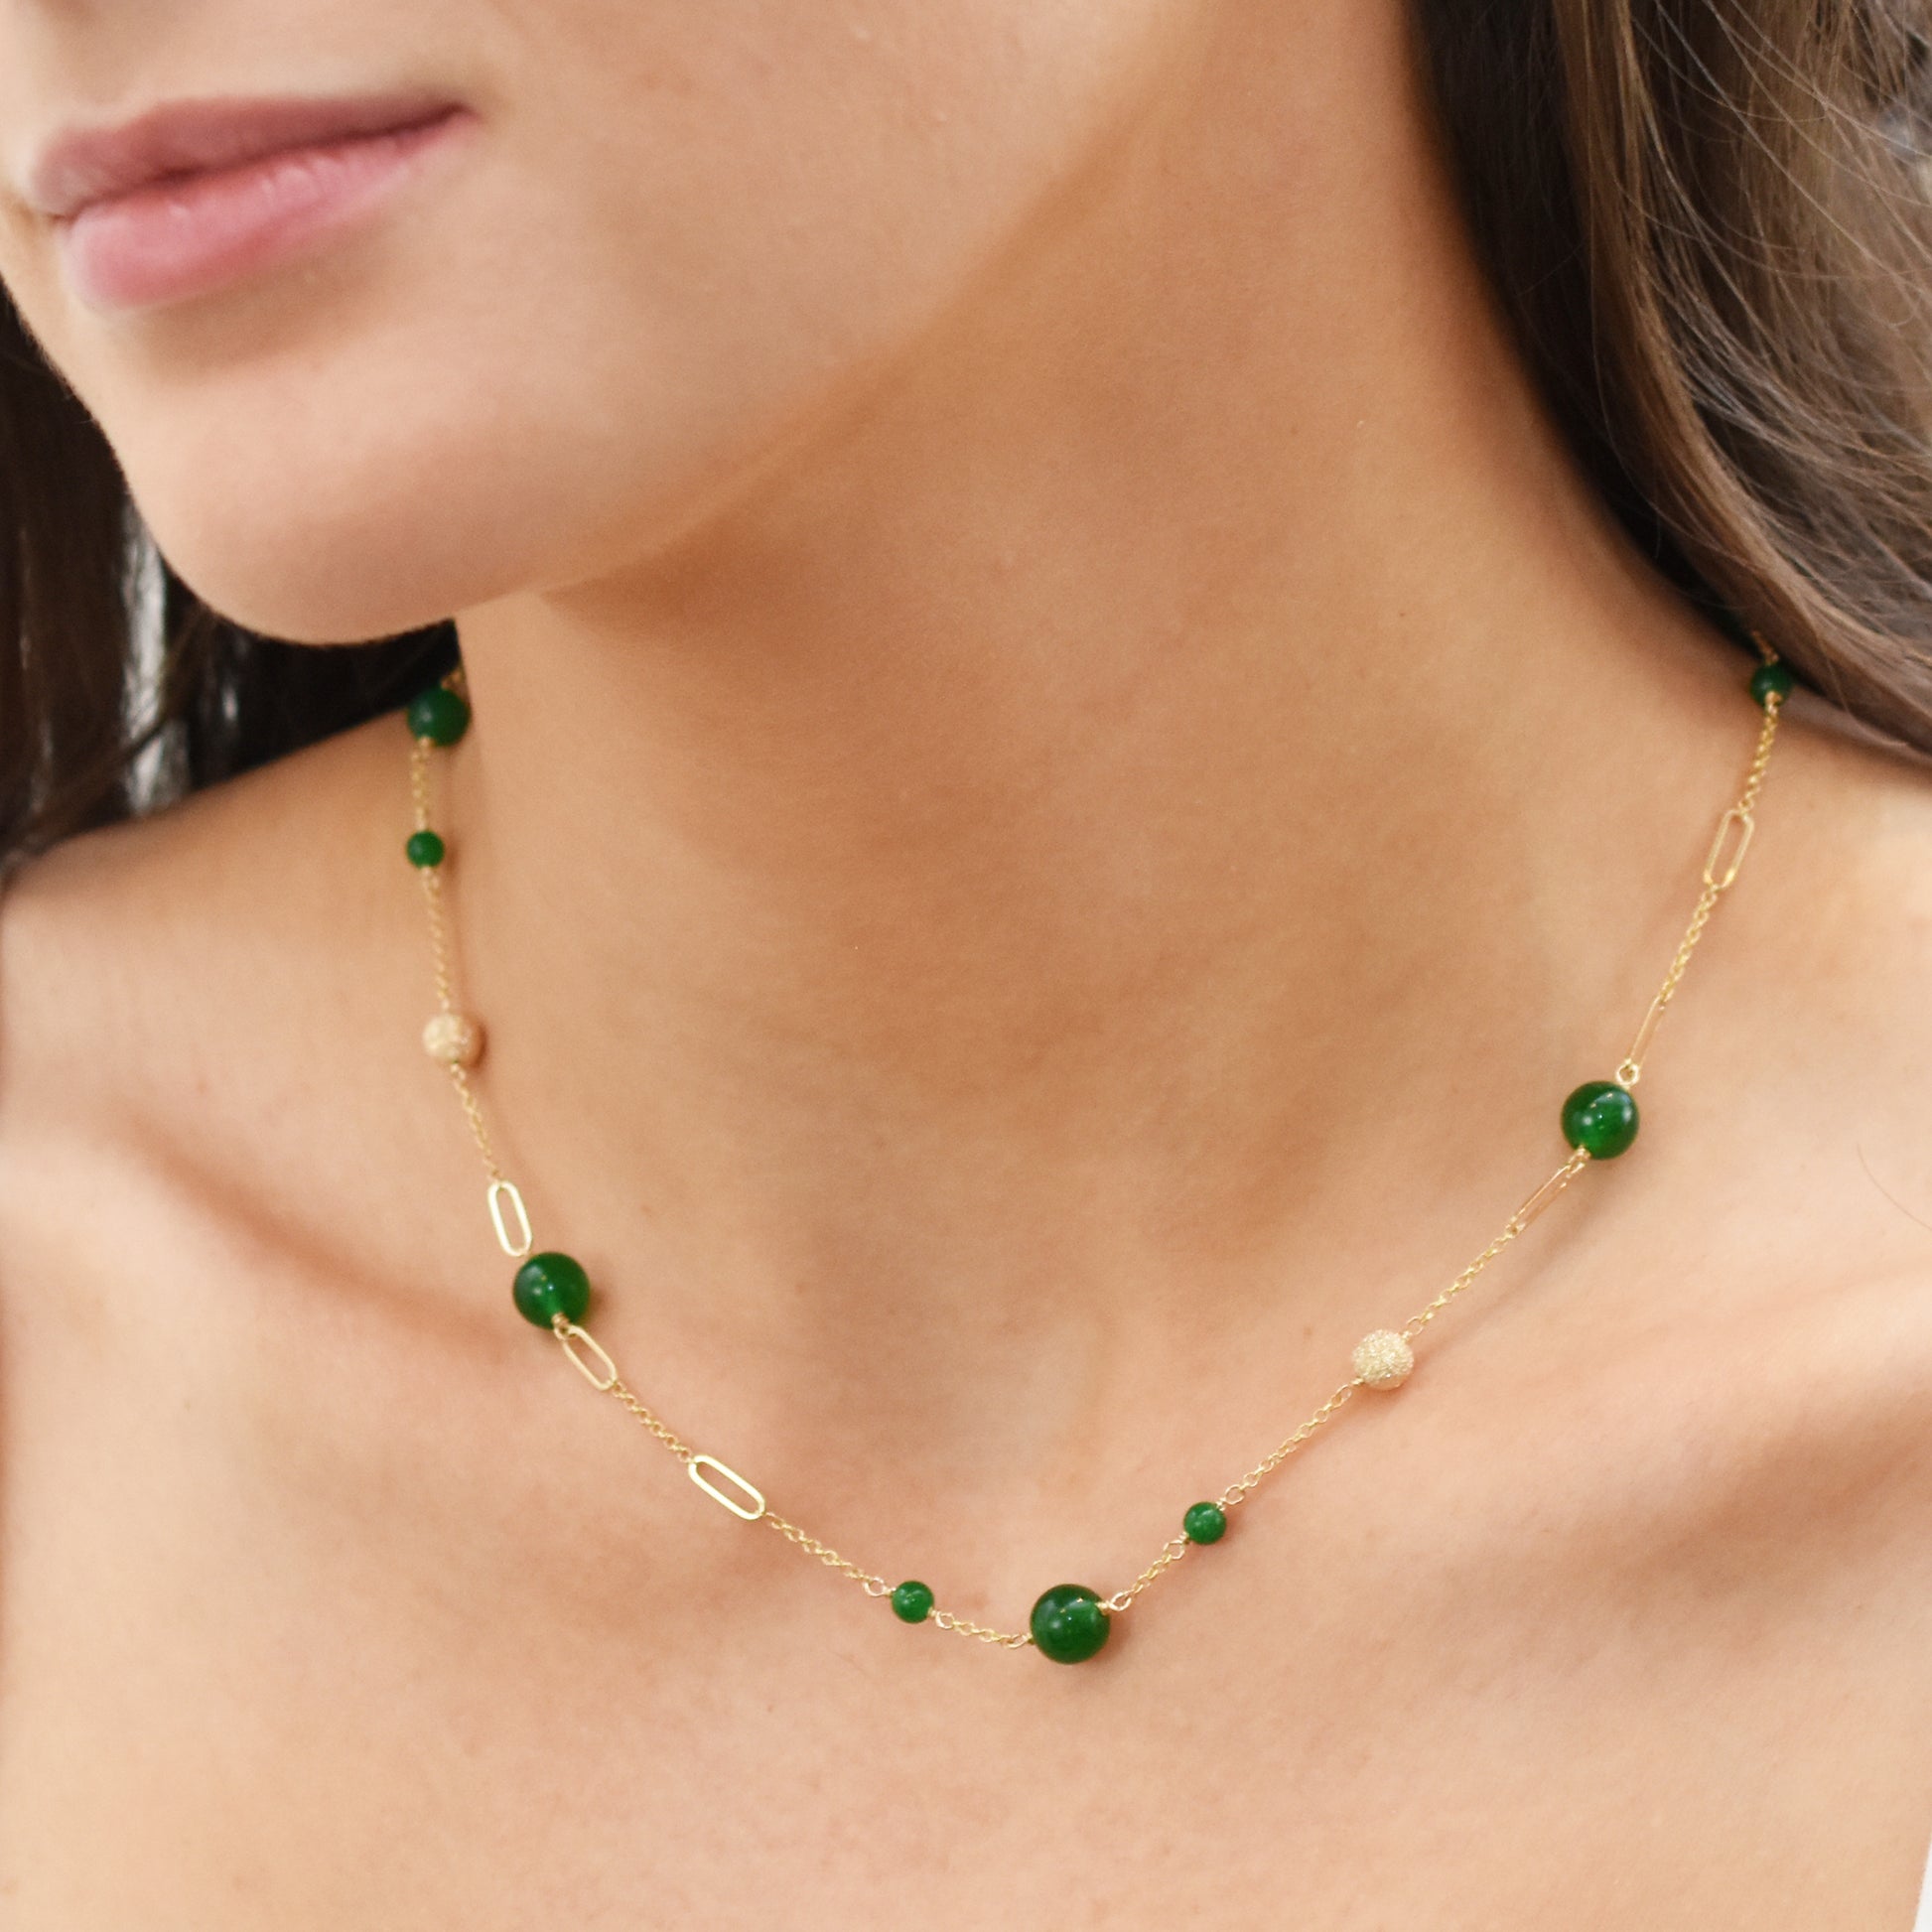 14k Green Jade Mixed Chain Necklace 18"